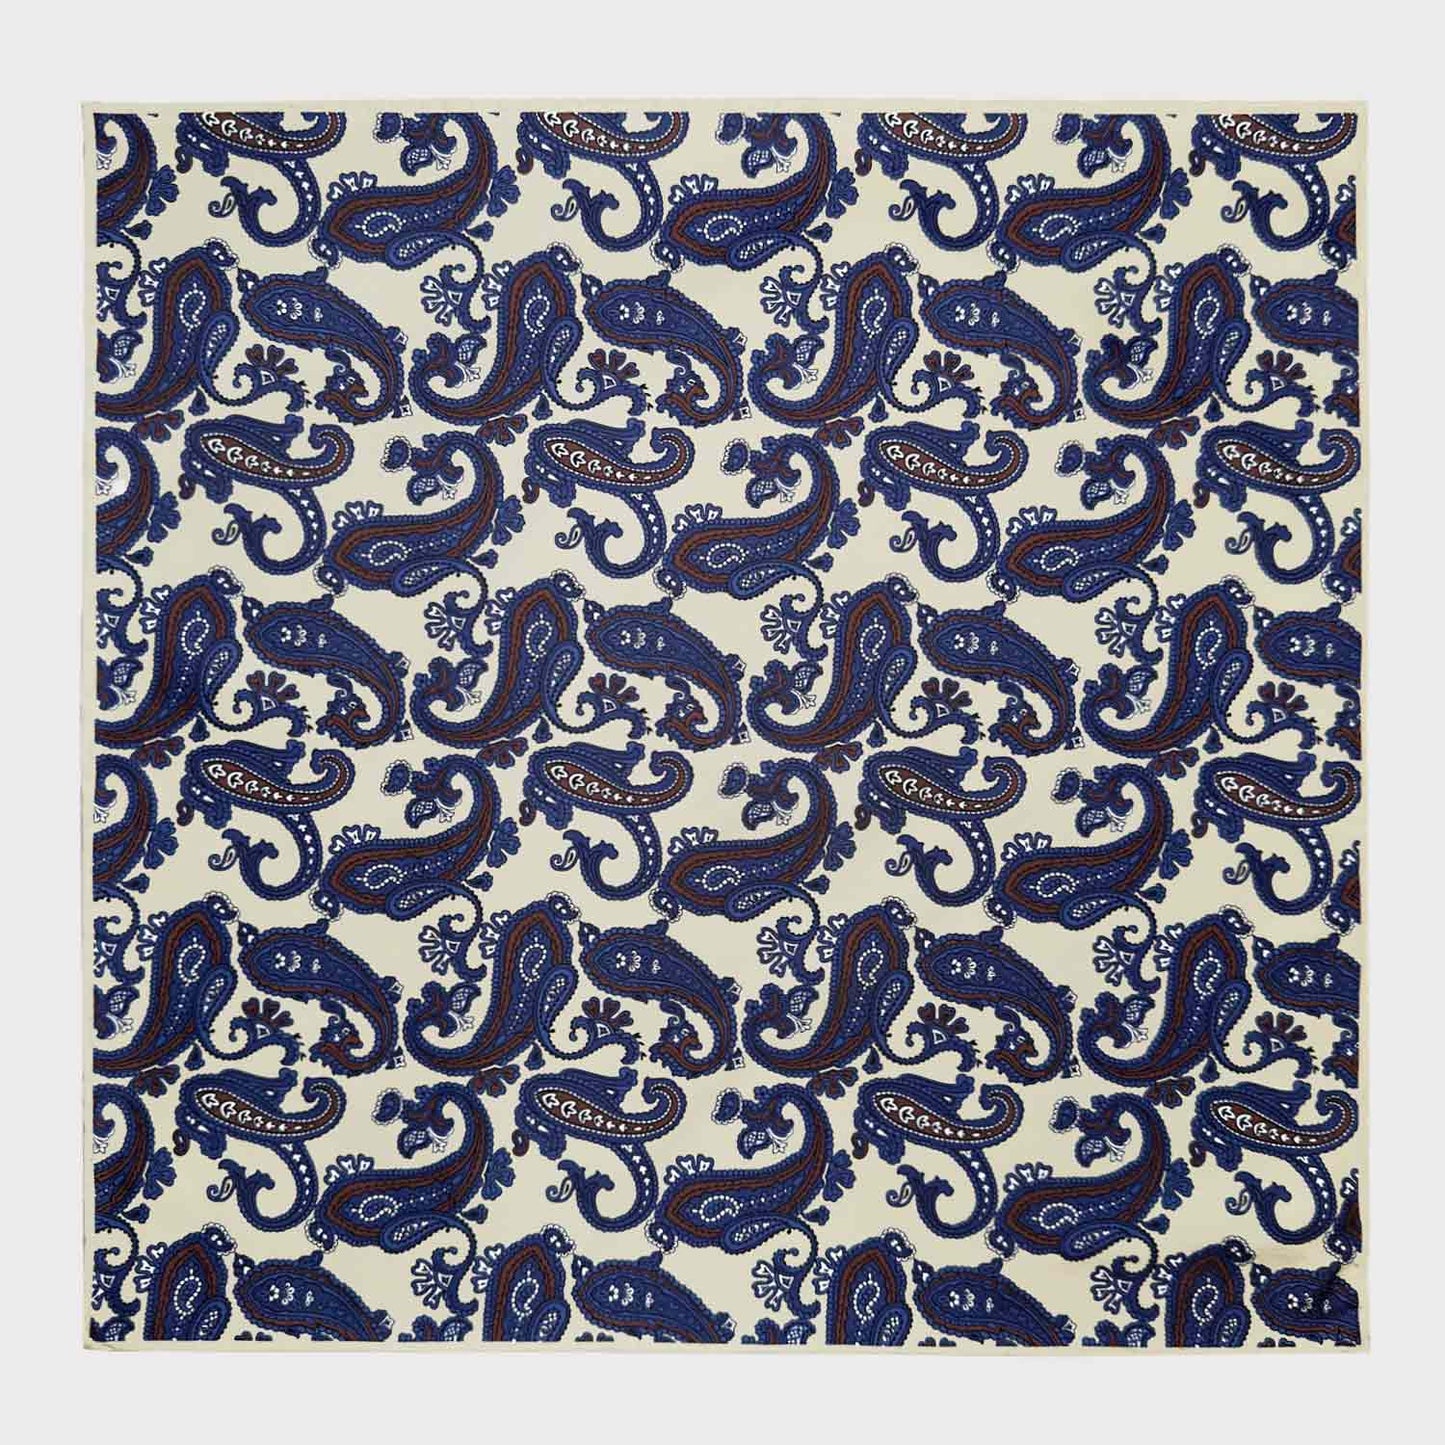 Ivory White Silk Pocket Square Paisley Pattern. Men's paisley pocket square made with soft silk and with rolled edge, ivory white background with coffee brown and denim blue paisley pattern, ideal for a refined men's outfit